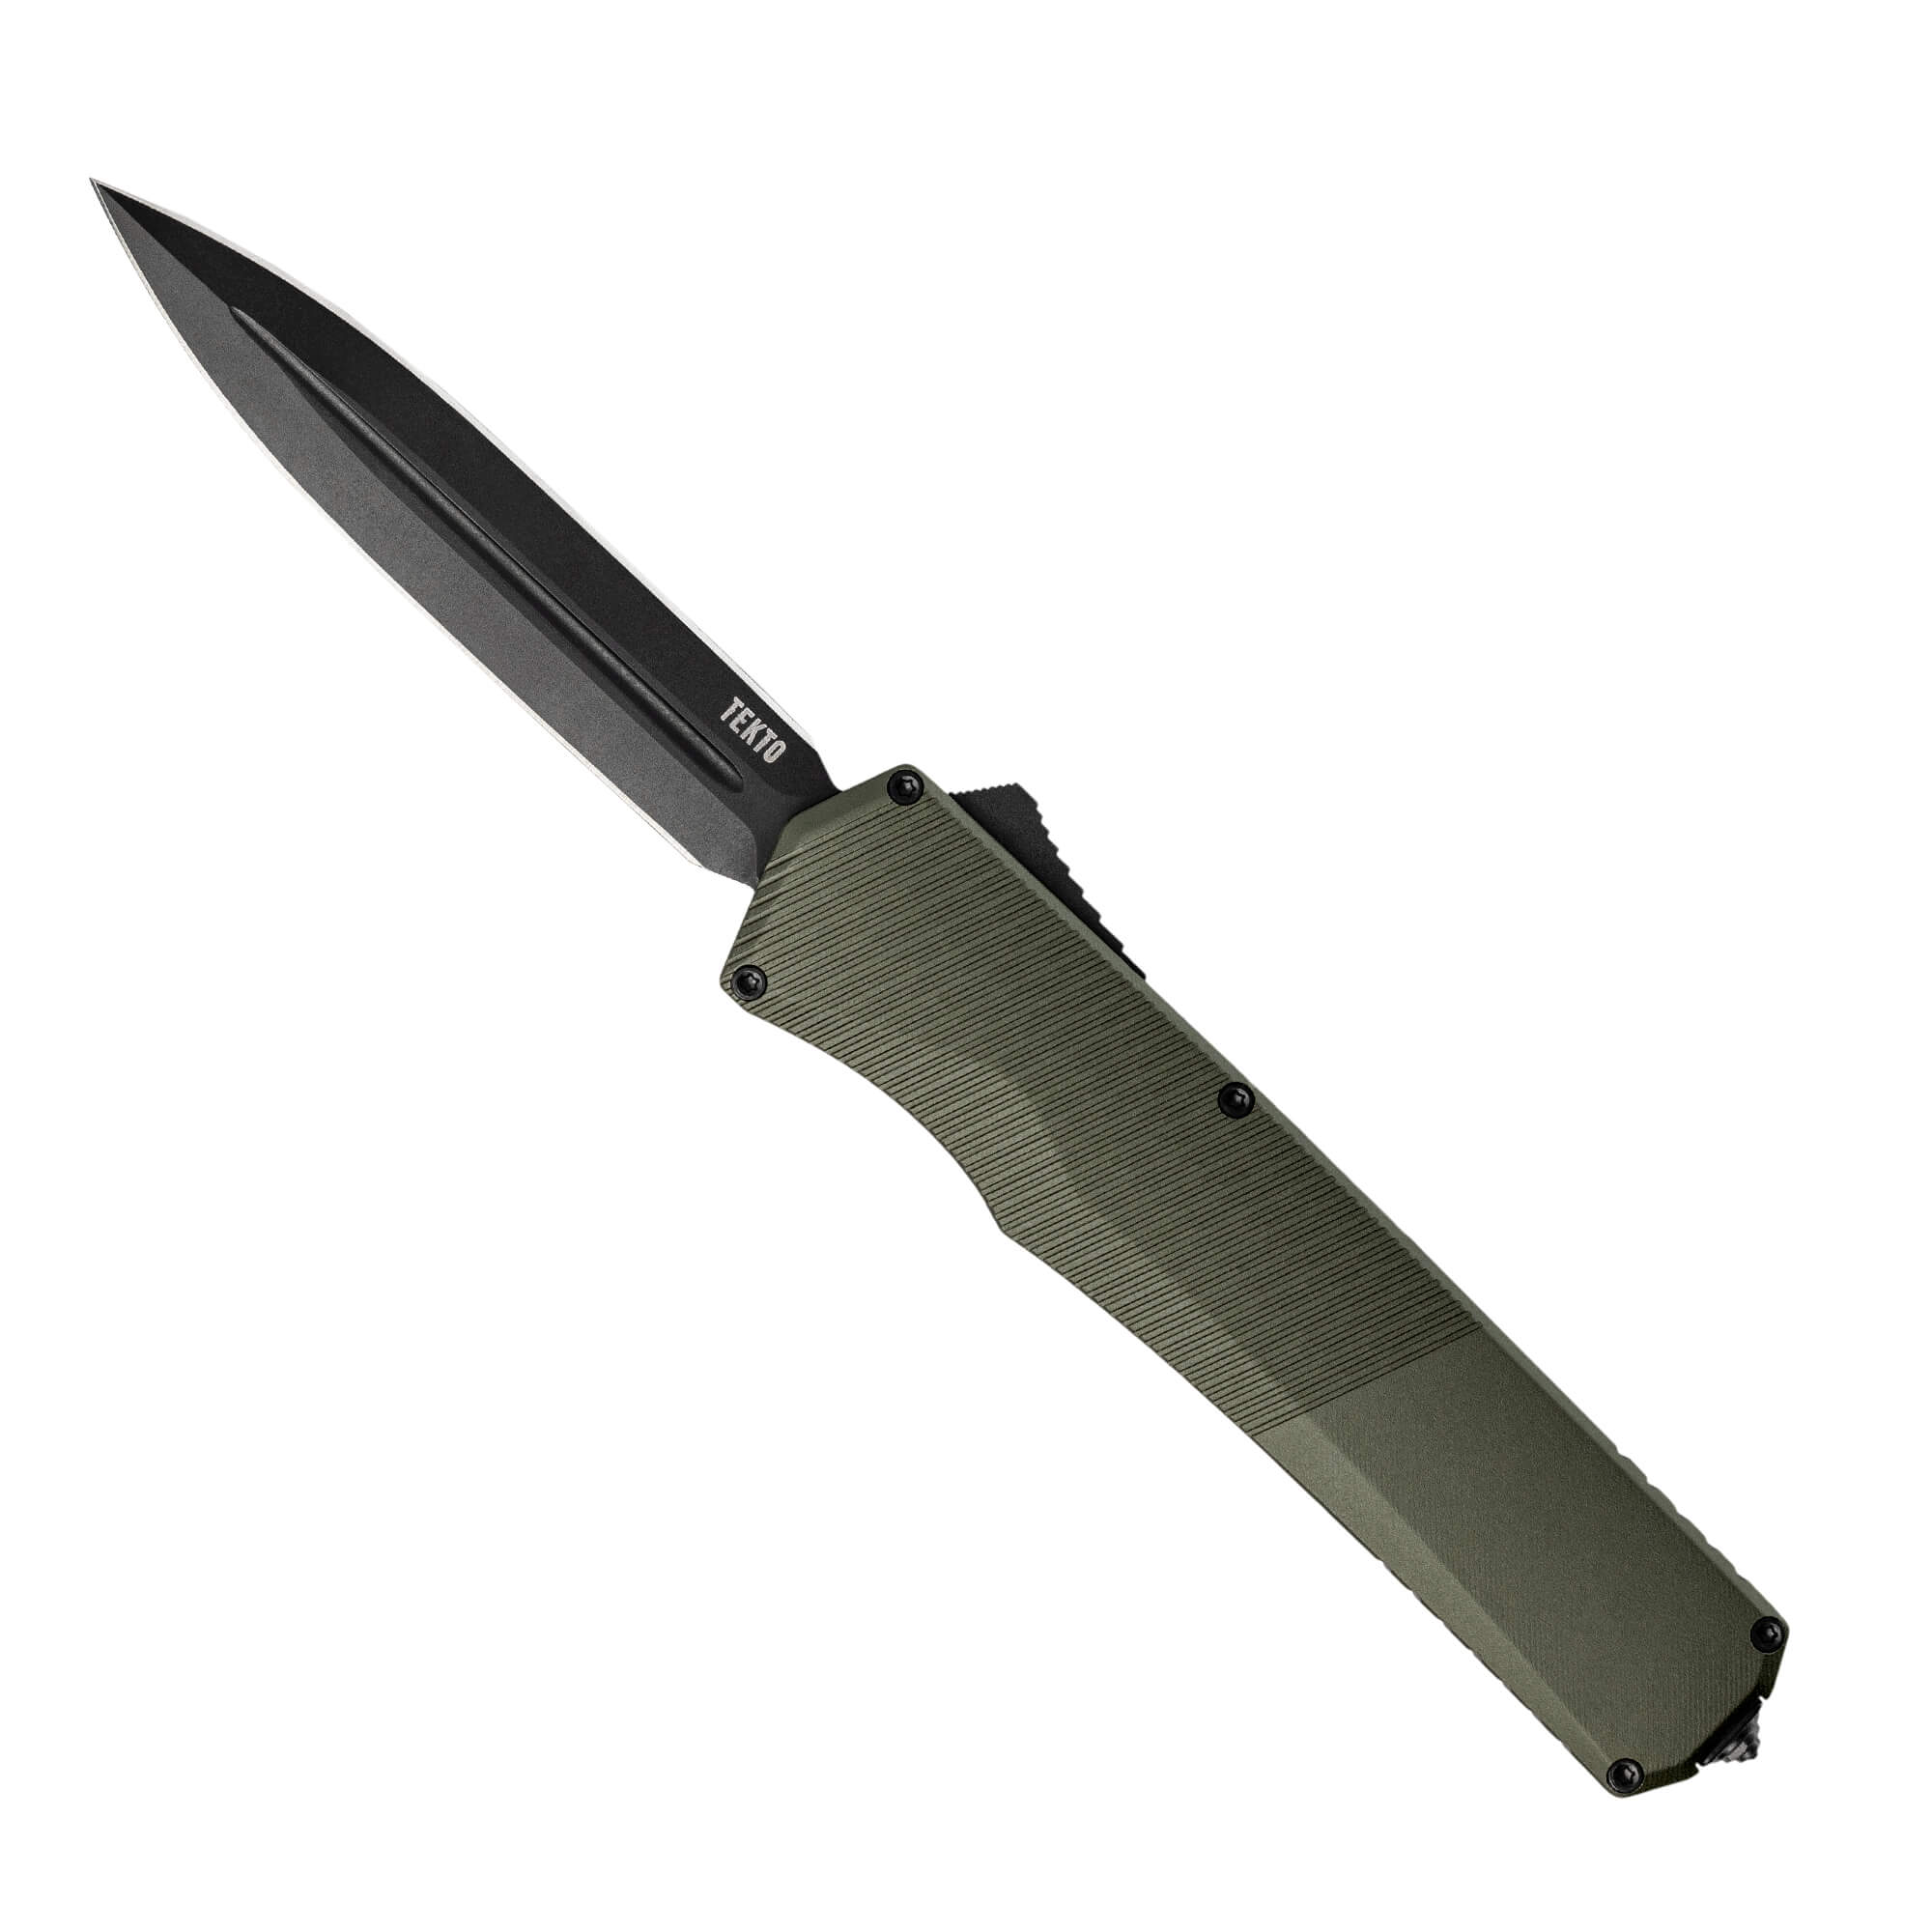 Tekto Knives A5 Spry - Automatic - OD Green Aluminum - Black CPM-S35VN Spear Point Blade